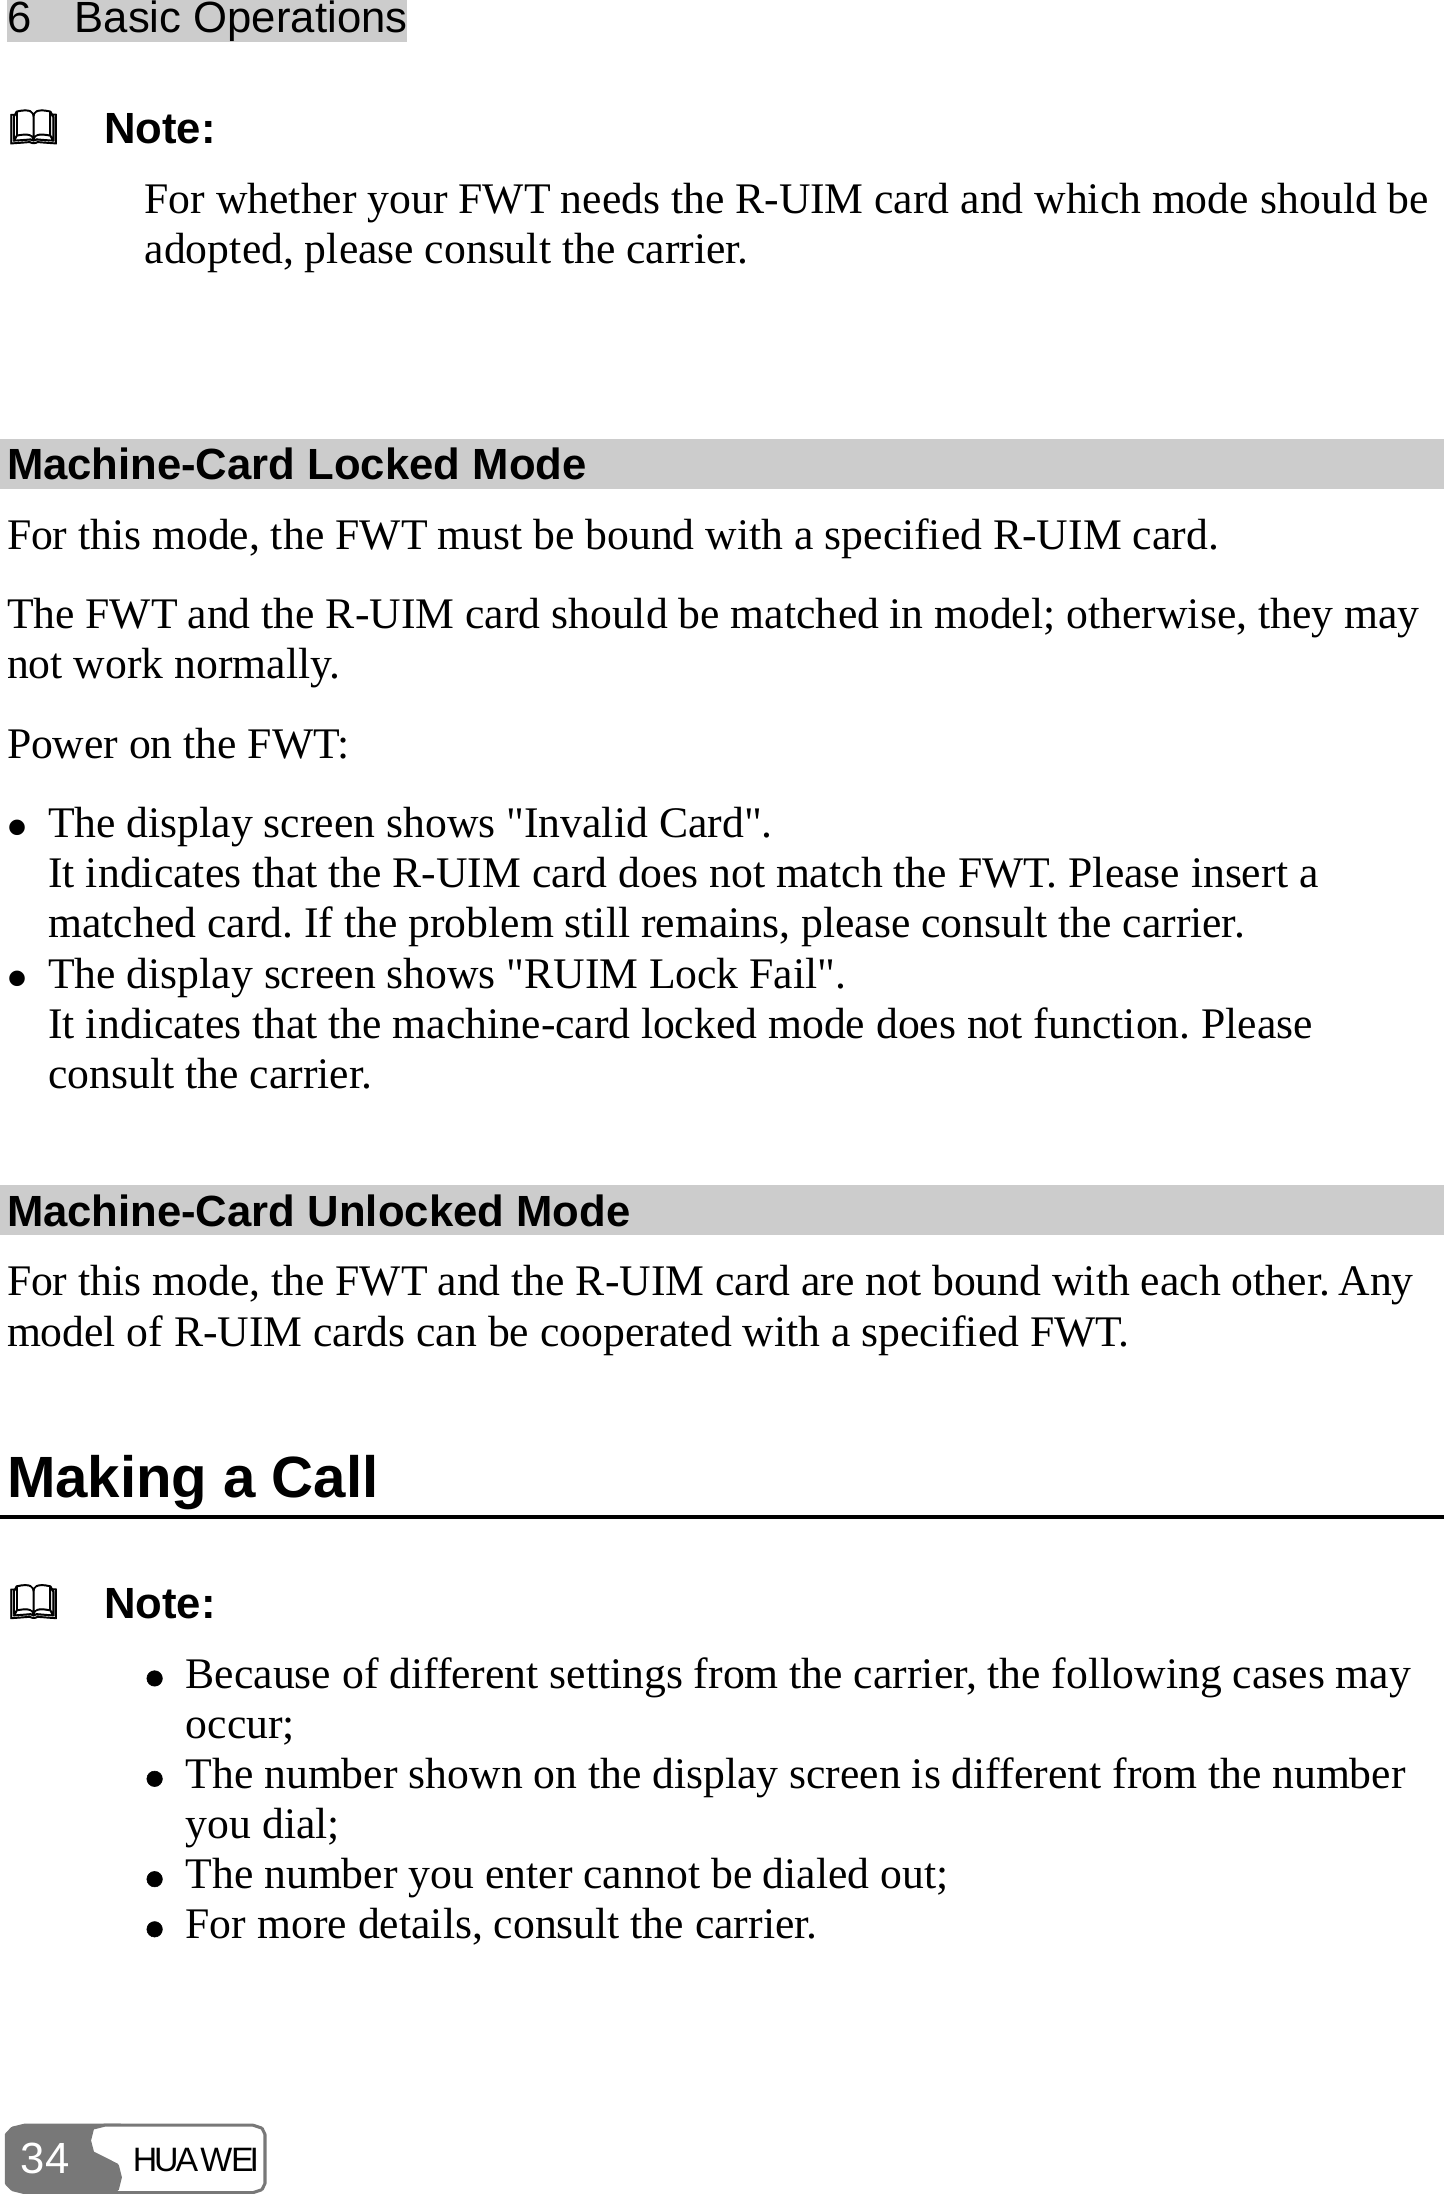 6  Basic Operations HUAWEI 34   Note: For whether your FWT needs the R-UIM card and which mode should be adopted, please consult the carrier.  Machine-Card Locked Mode For this mode, the FWT must be bound with a specified R-UIM card. The FWT and the R-UIM card should be matched in model; otherwise, they may not work normally. Power on the FWT: z The display screen shows &quot;Invalid Card&quot;. It indicates that the R-UIM card does not match the FWT. Please insert a matched card. If the problem still remains, please consult the carrier. z The display screen shows &quot;RUIM Lock Fail&quot;. It indicates that the machine-card locked mode does not function. Please consult the carrier. Machine-Card Unlocked Mode For this mode, the FWT and the R-UIM card are not bound with each other. Any model of R-UIM cards can be cooperated with a specified FWT. Making a Call   Note: z Because of different settings from the carrier, the following cases may occur; z The number shown on the display screen is different from the number you dial; z The number you enter cannot be dialed out; z For more details, consult the carrier.  